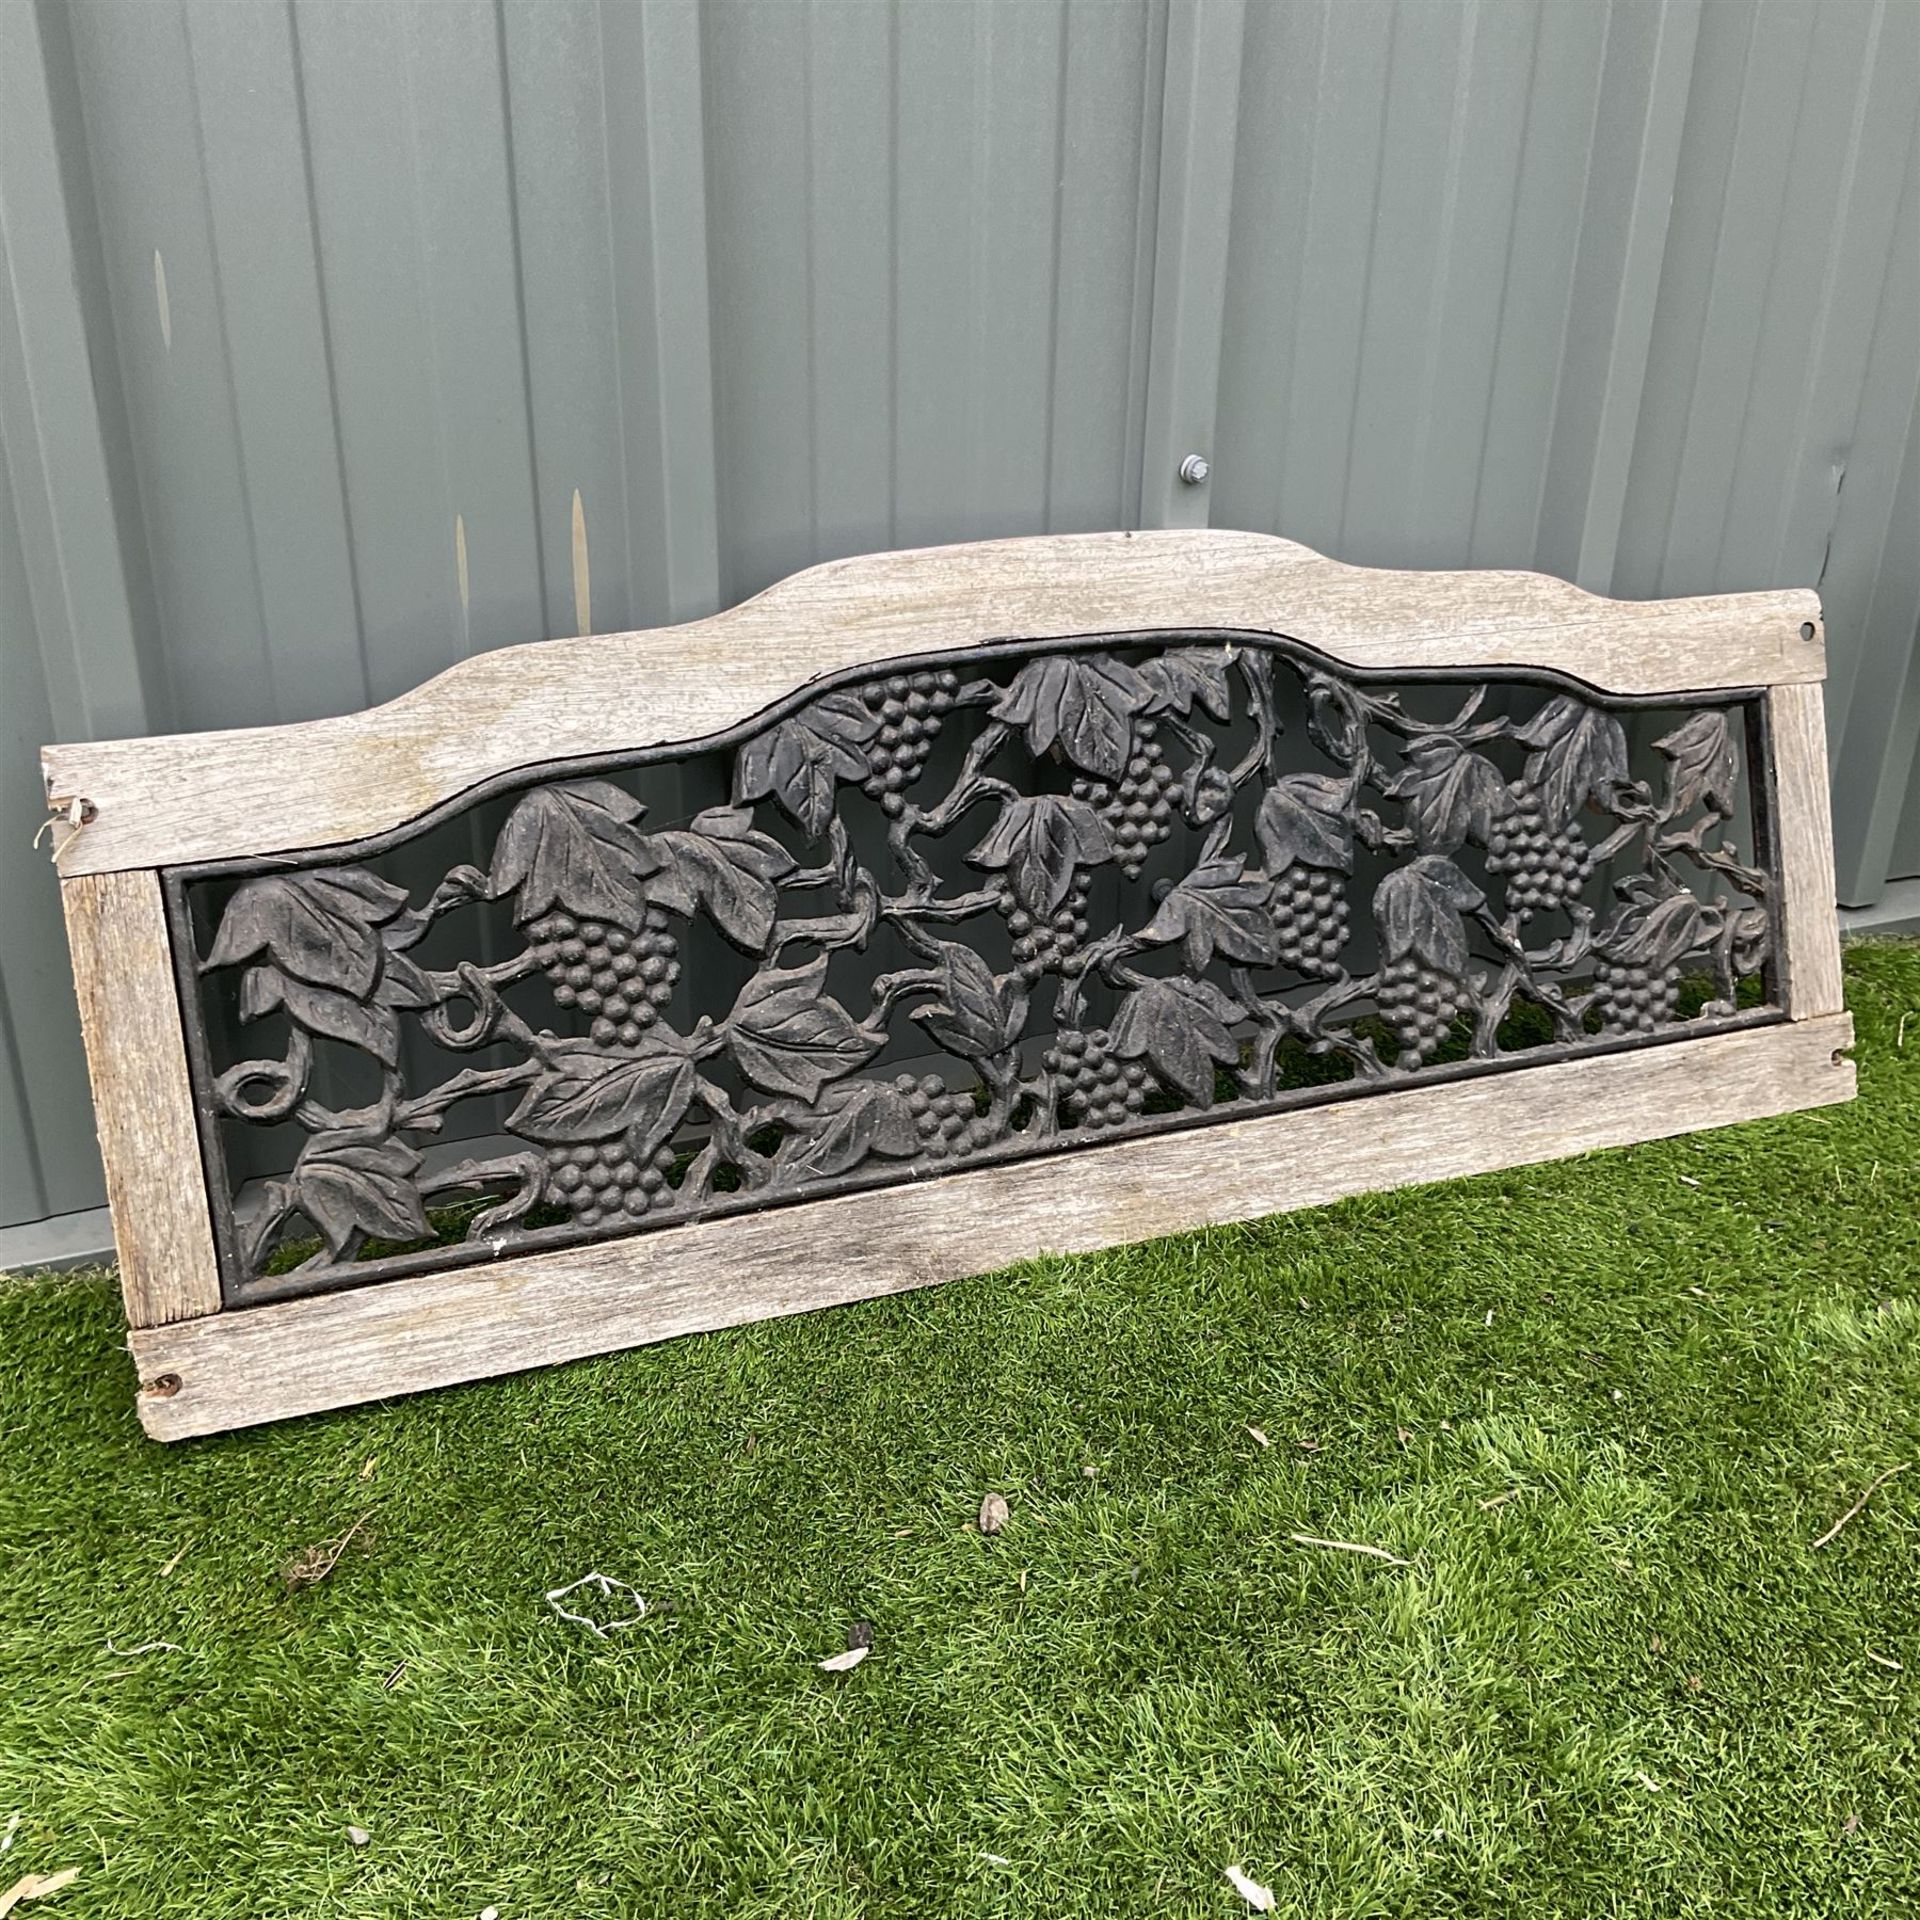 Cast iron garden seat ends and back painted in black - Image 2 of 4